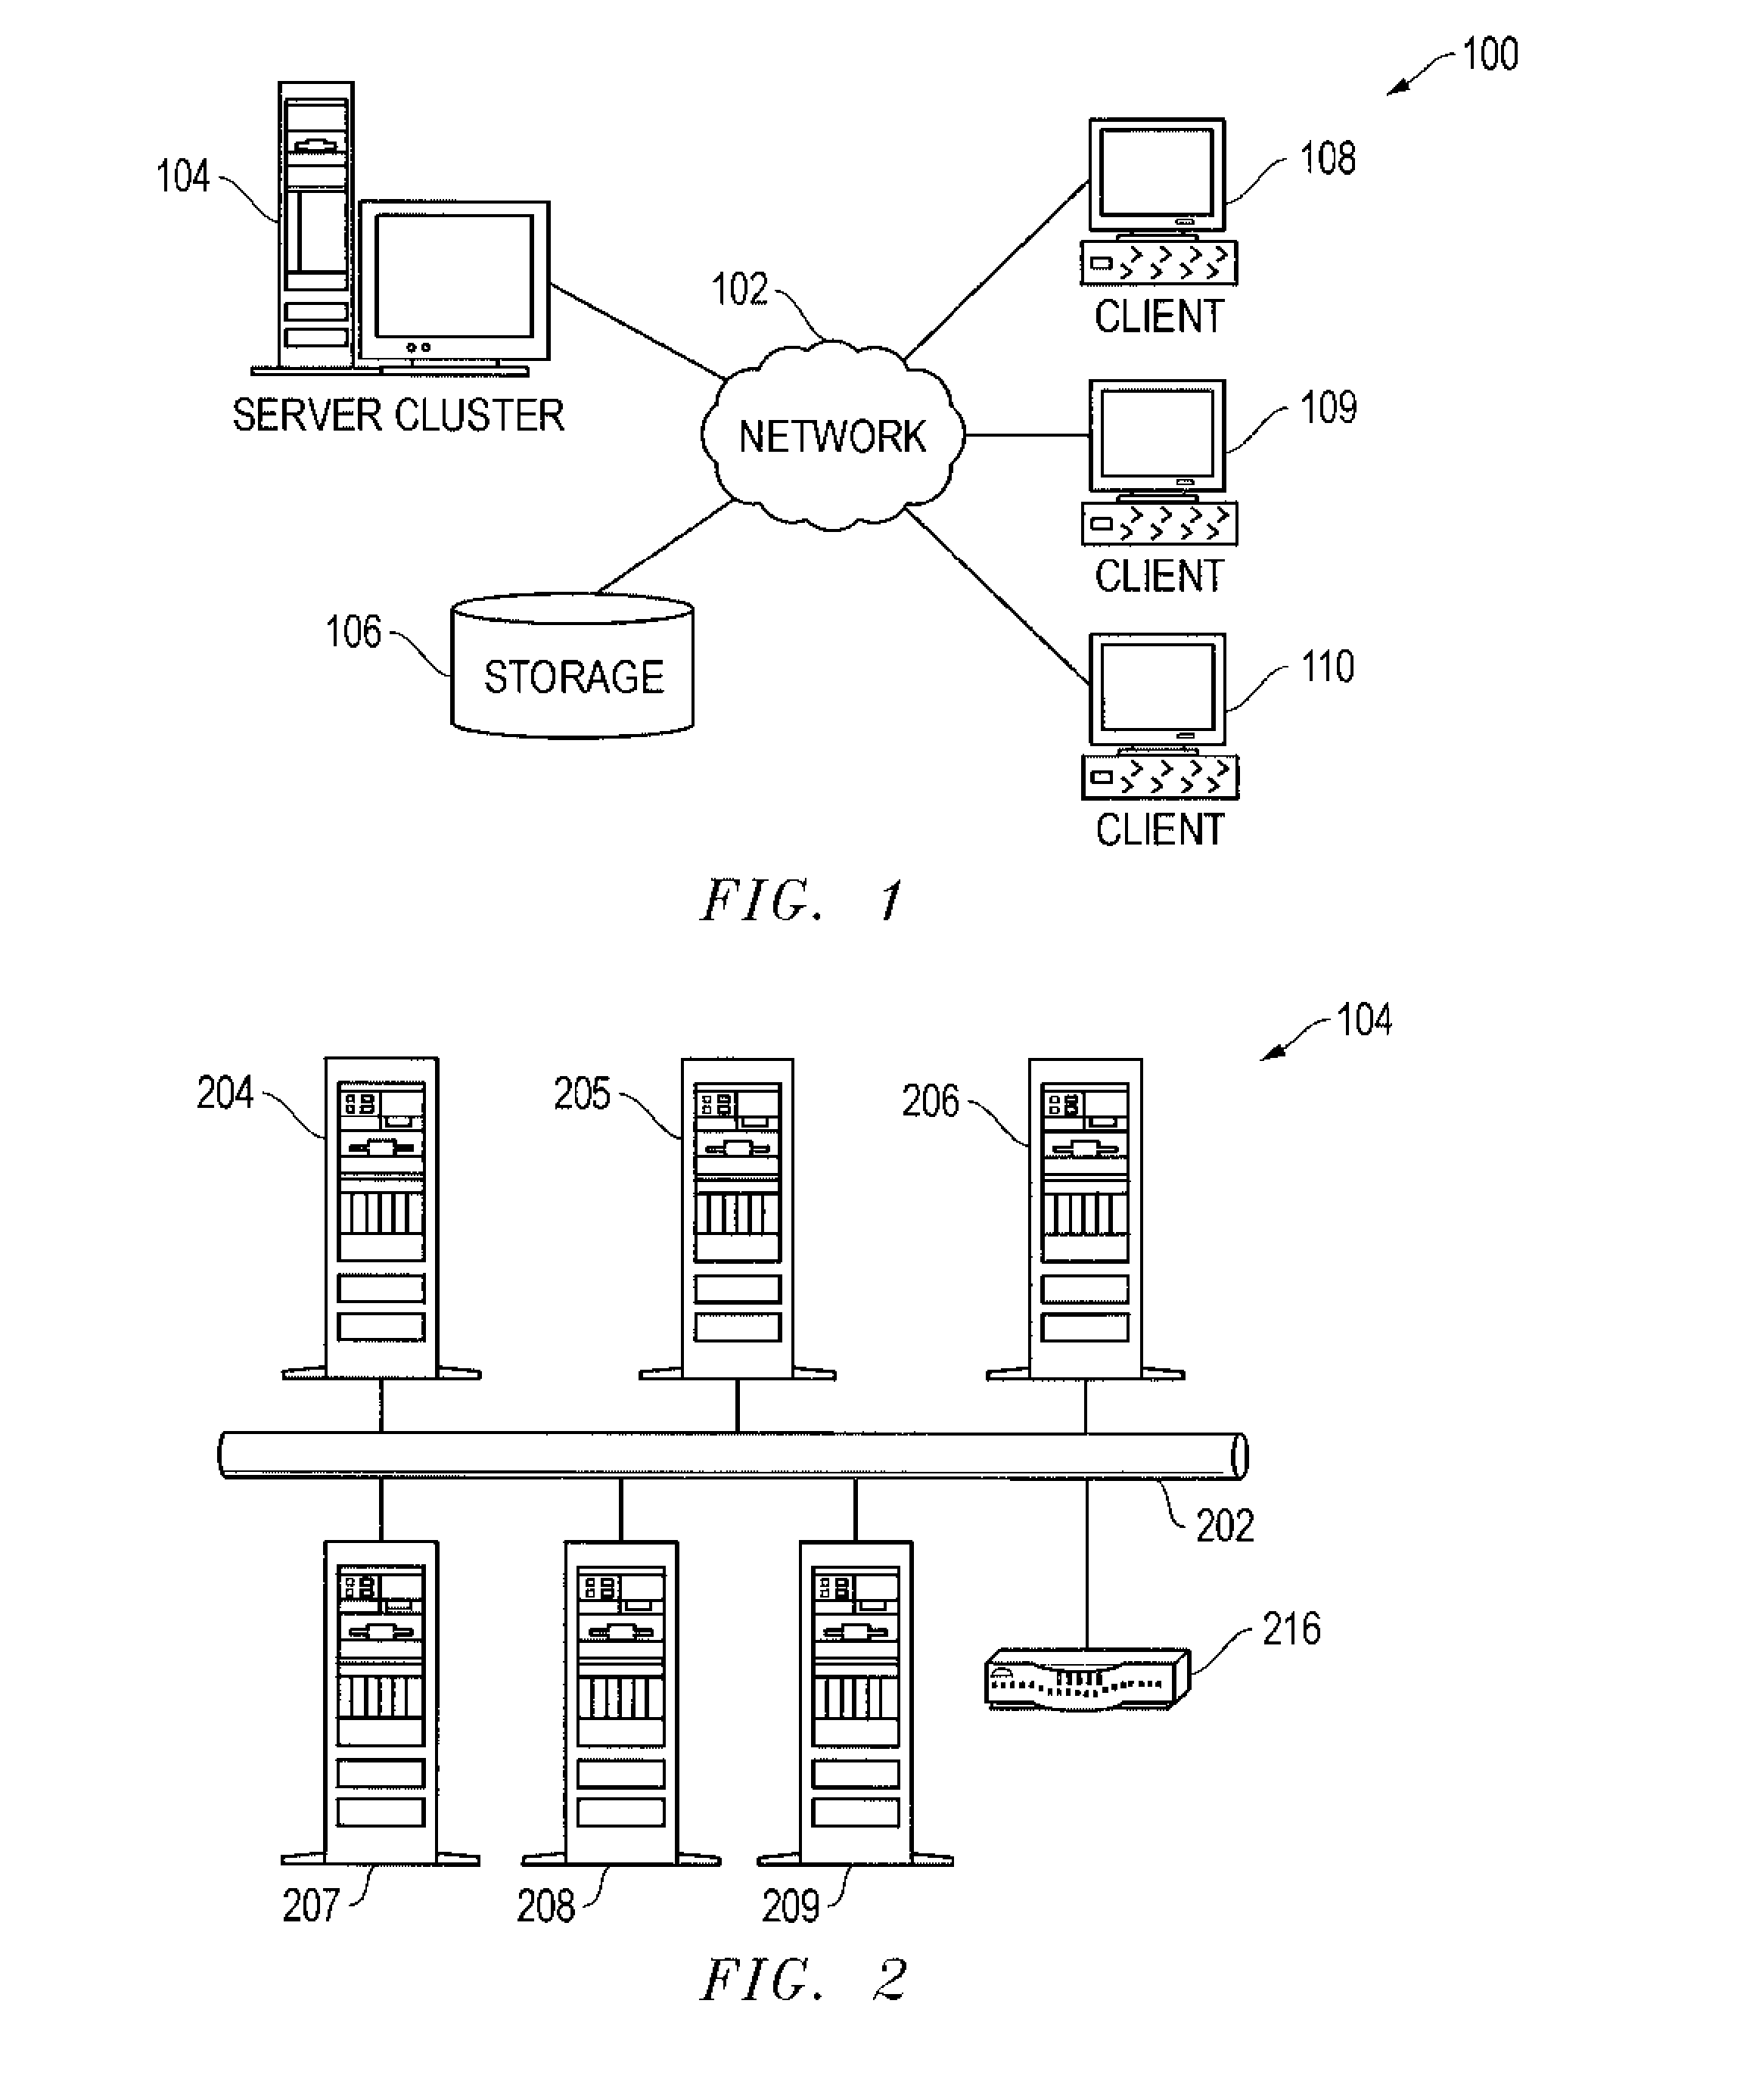 Method and apparatus for monitoring deployment of applications and configuration changes in a network of data processing systems